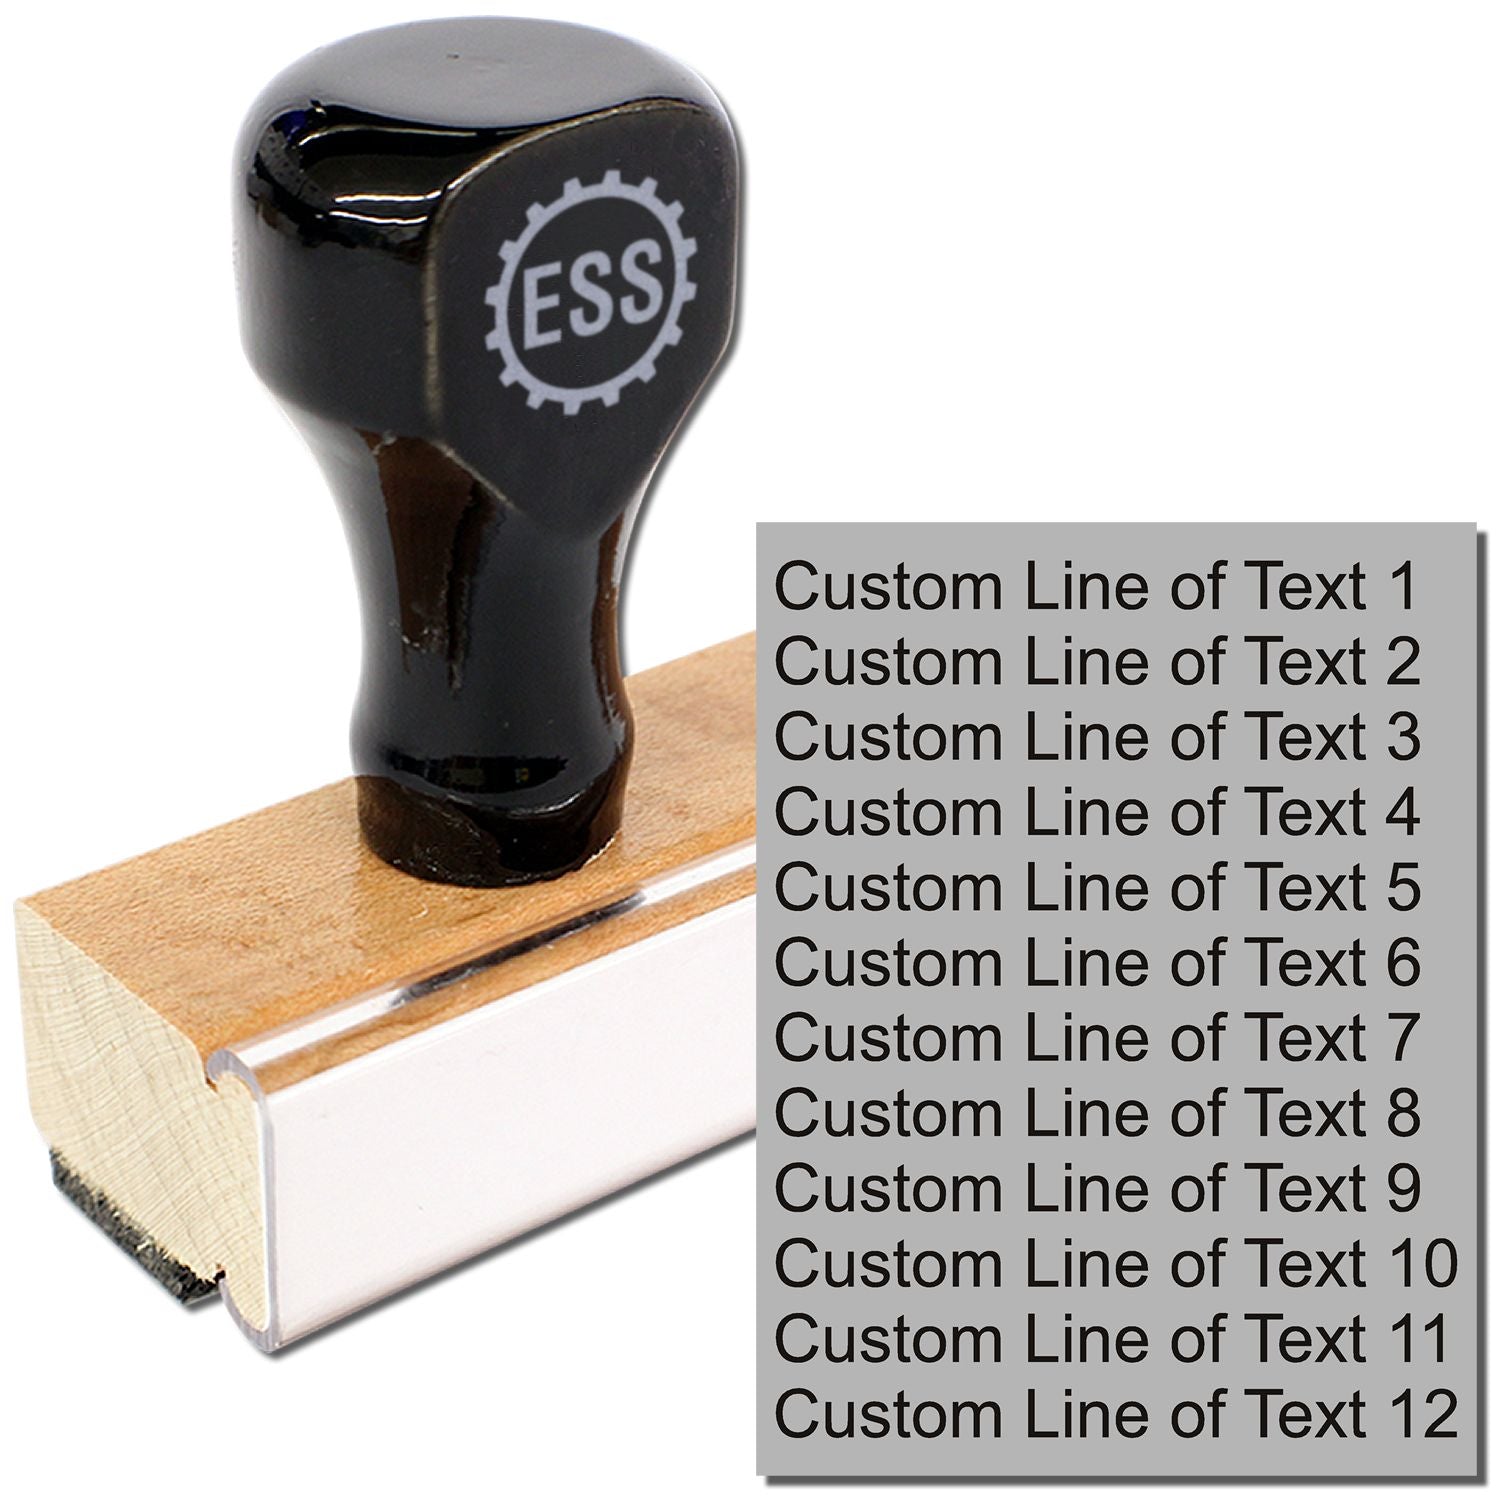 Custom Rubber Stamps - Fast Shipping